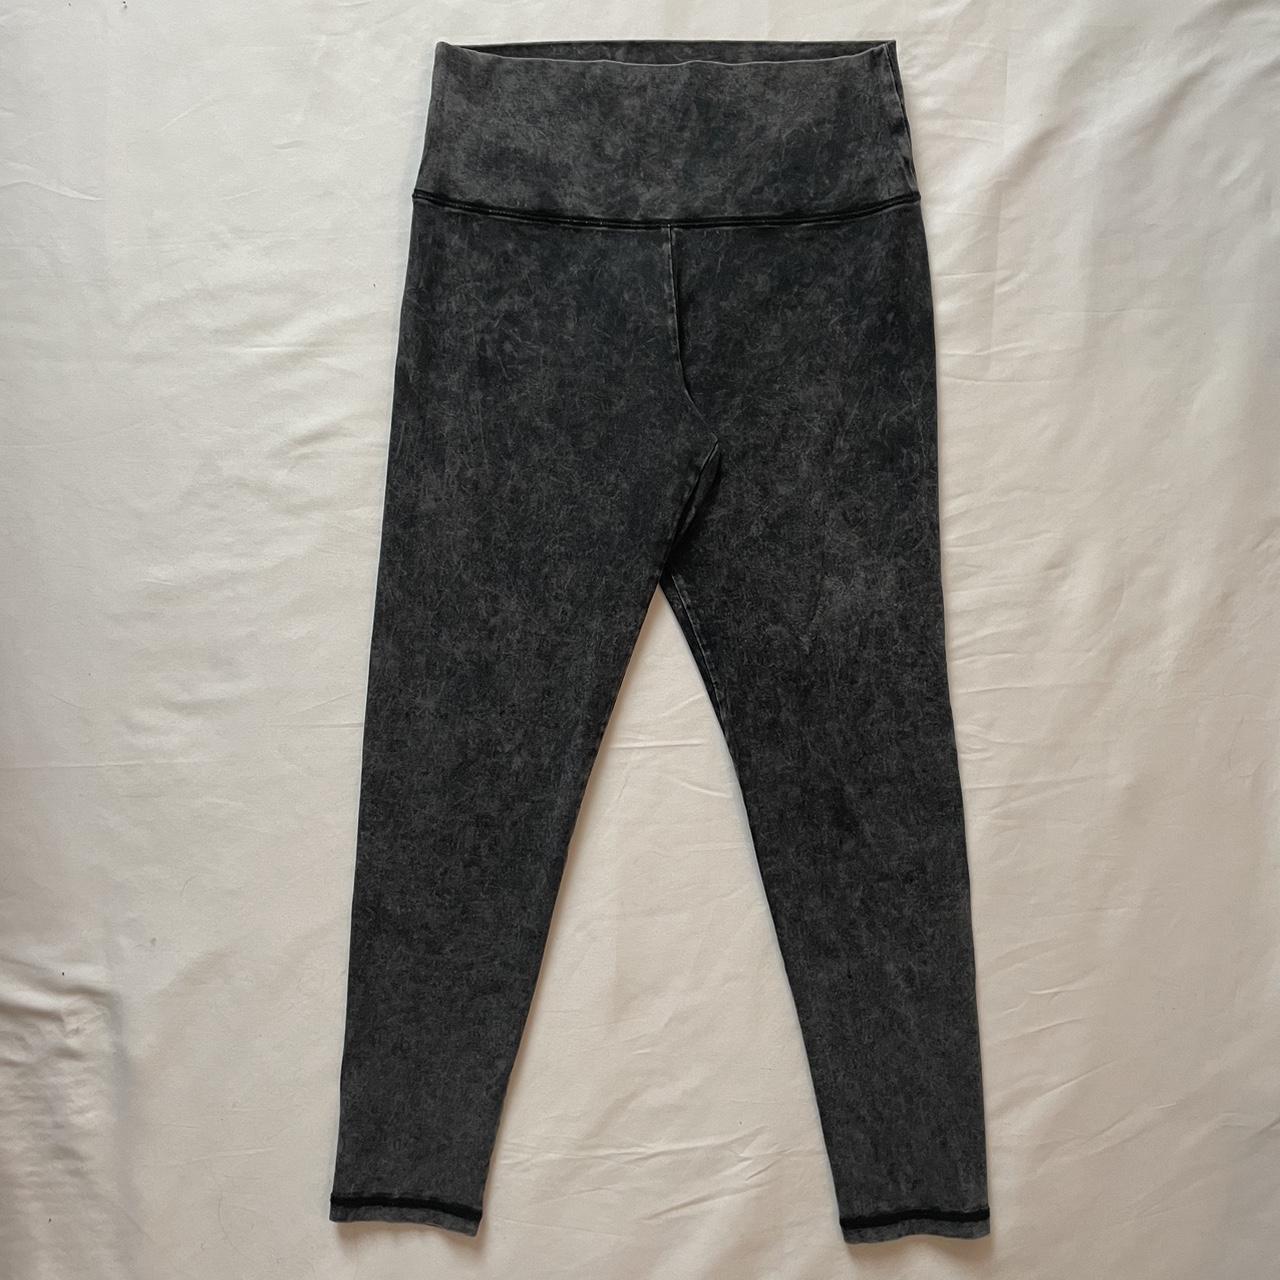 Aerie acid wash high rise leggings. Soft, supportive